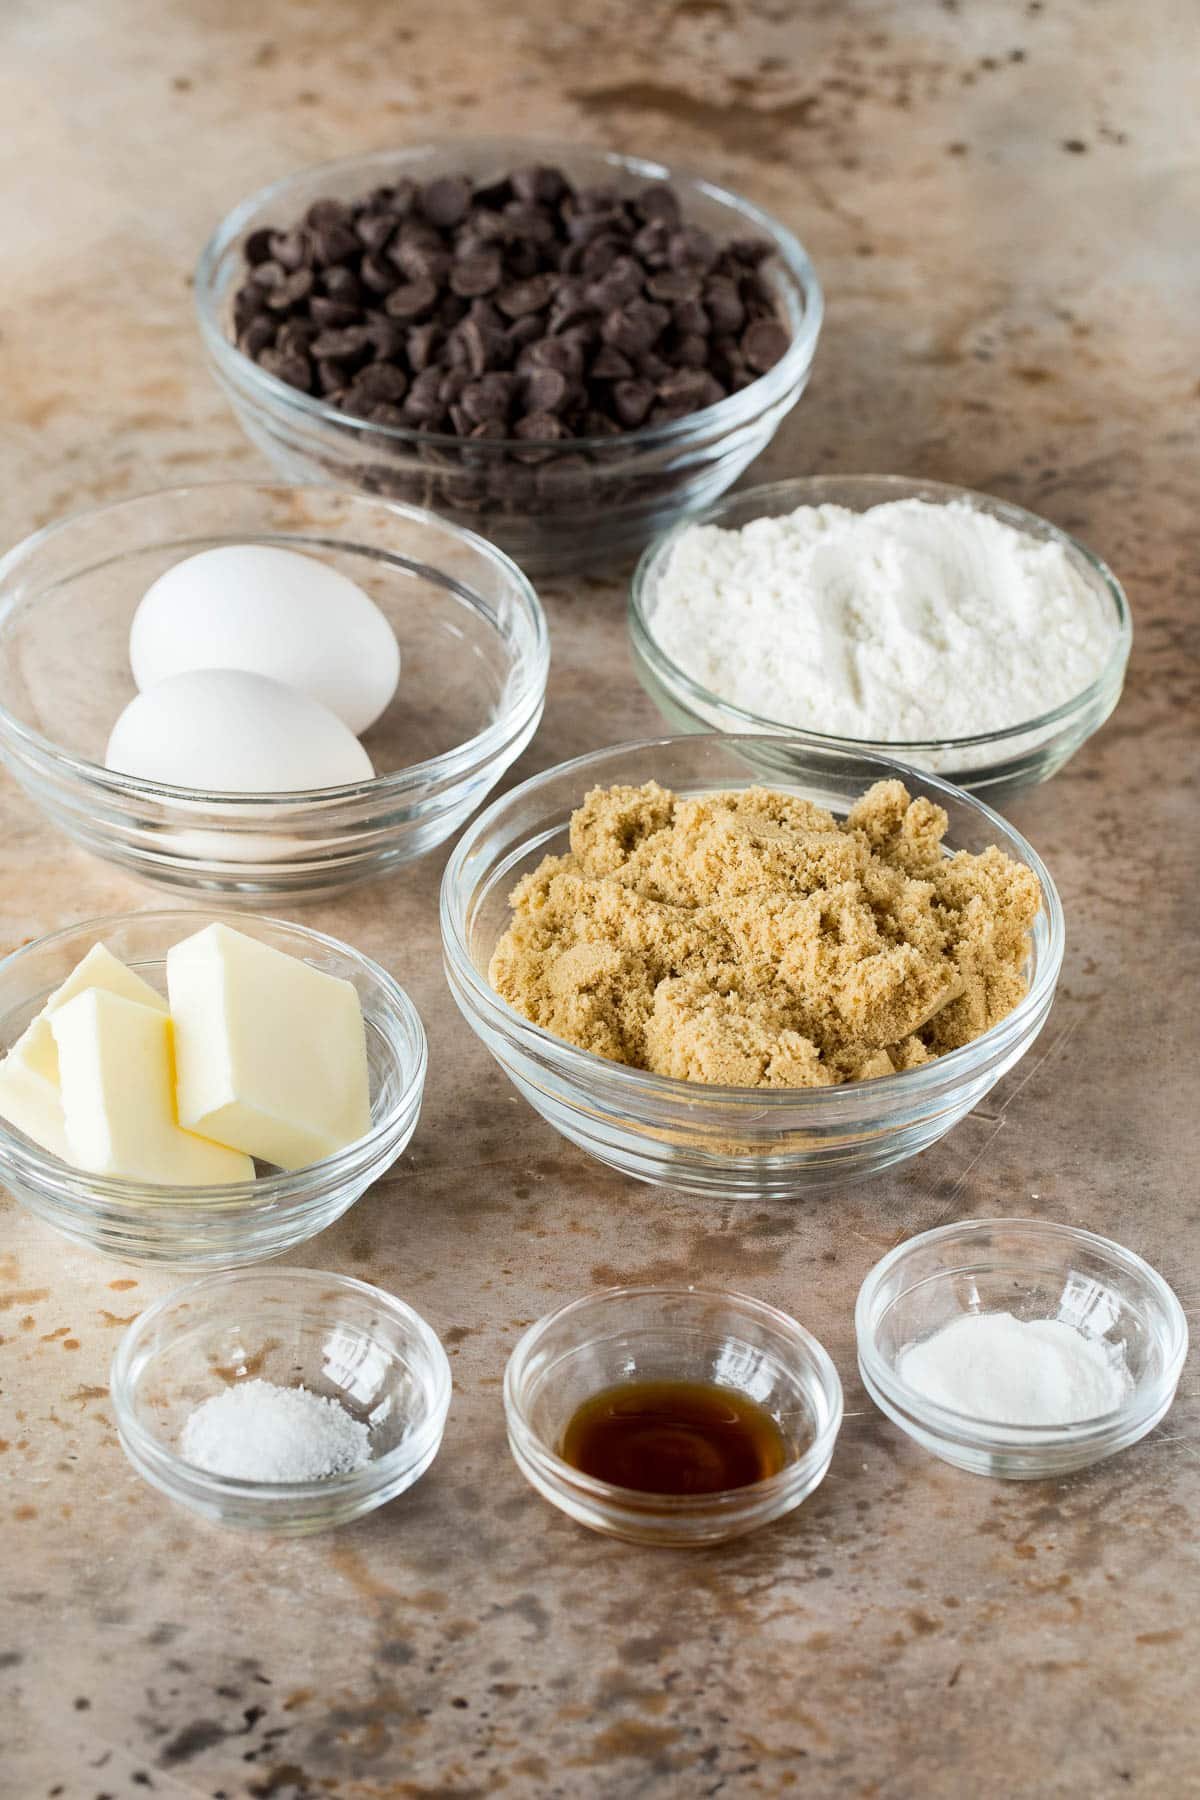 Bowls of ingredients including brown sugar, chocolate chips., flour, butter and eggs.